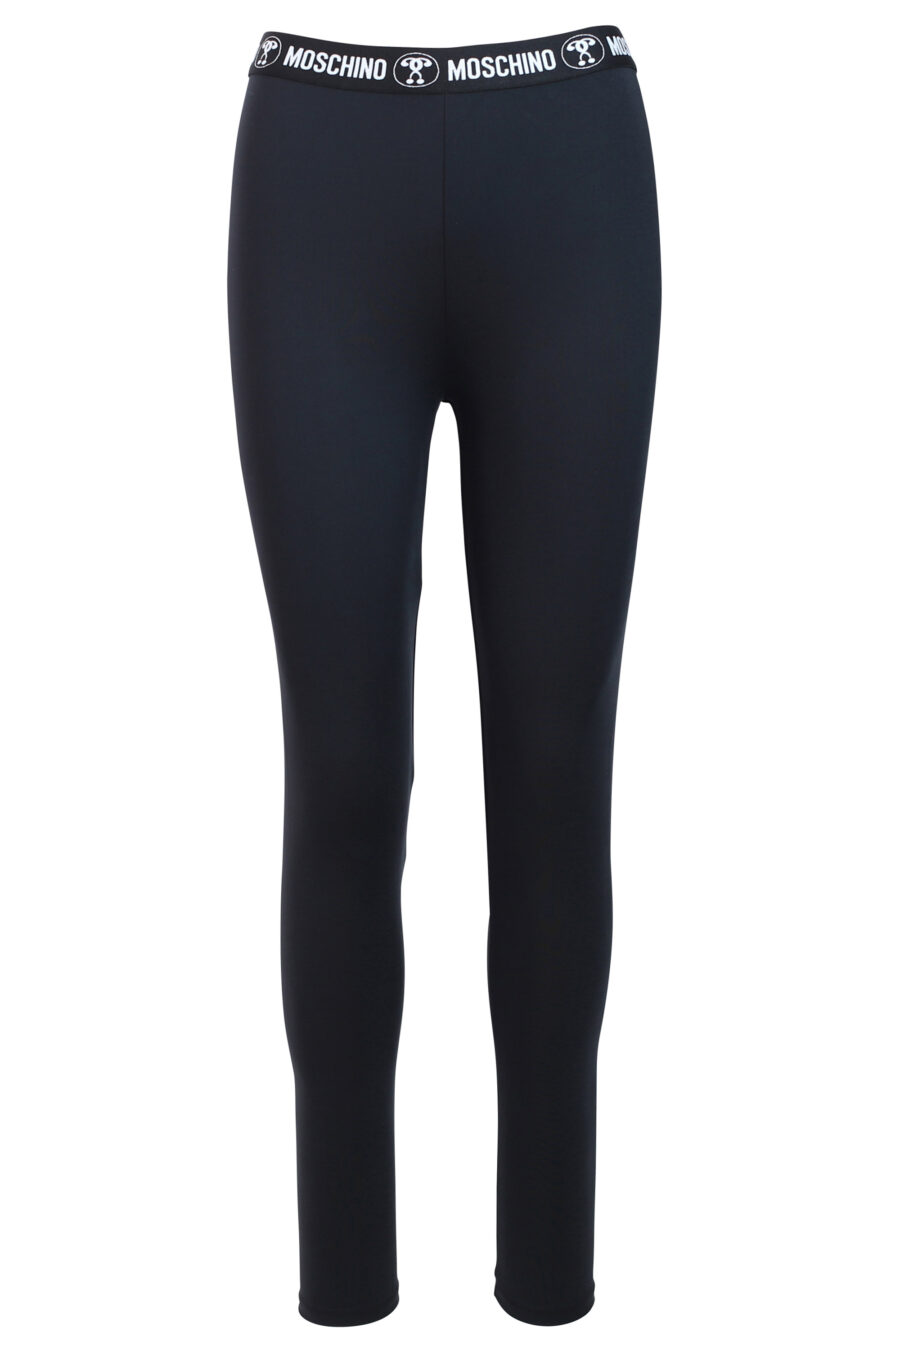 Black leggings with double question logo on tape - IMG 0686